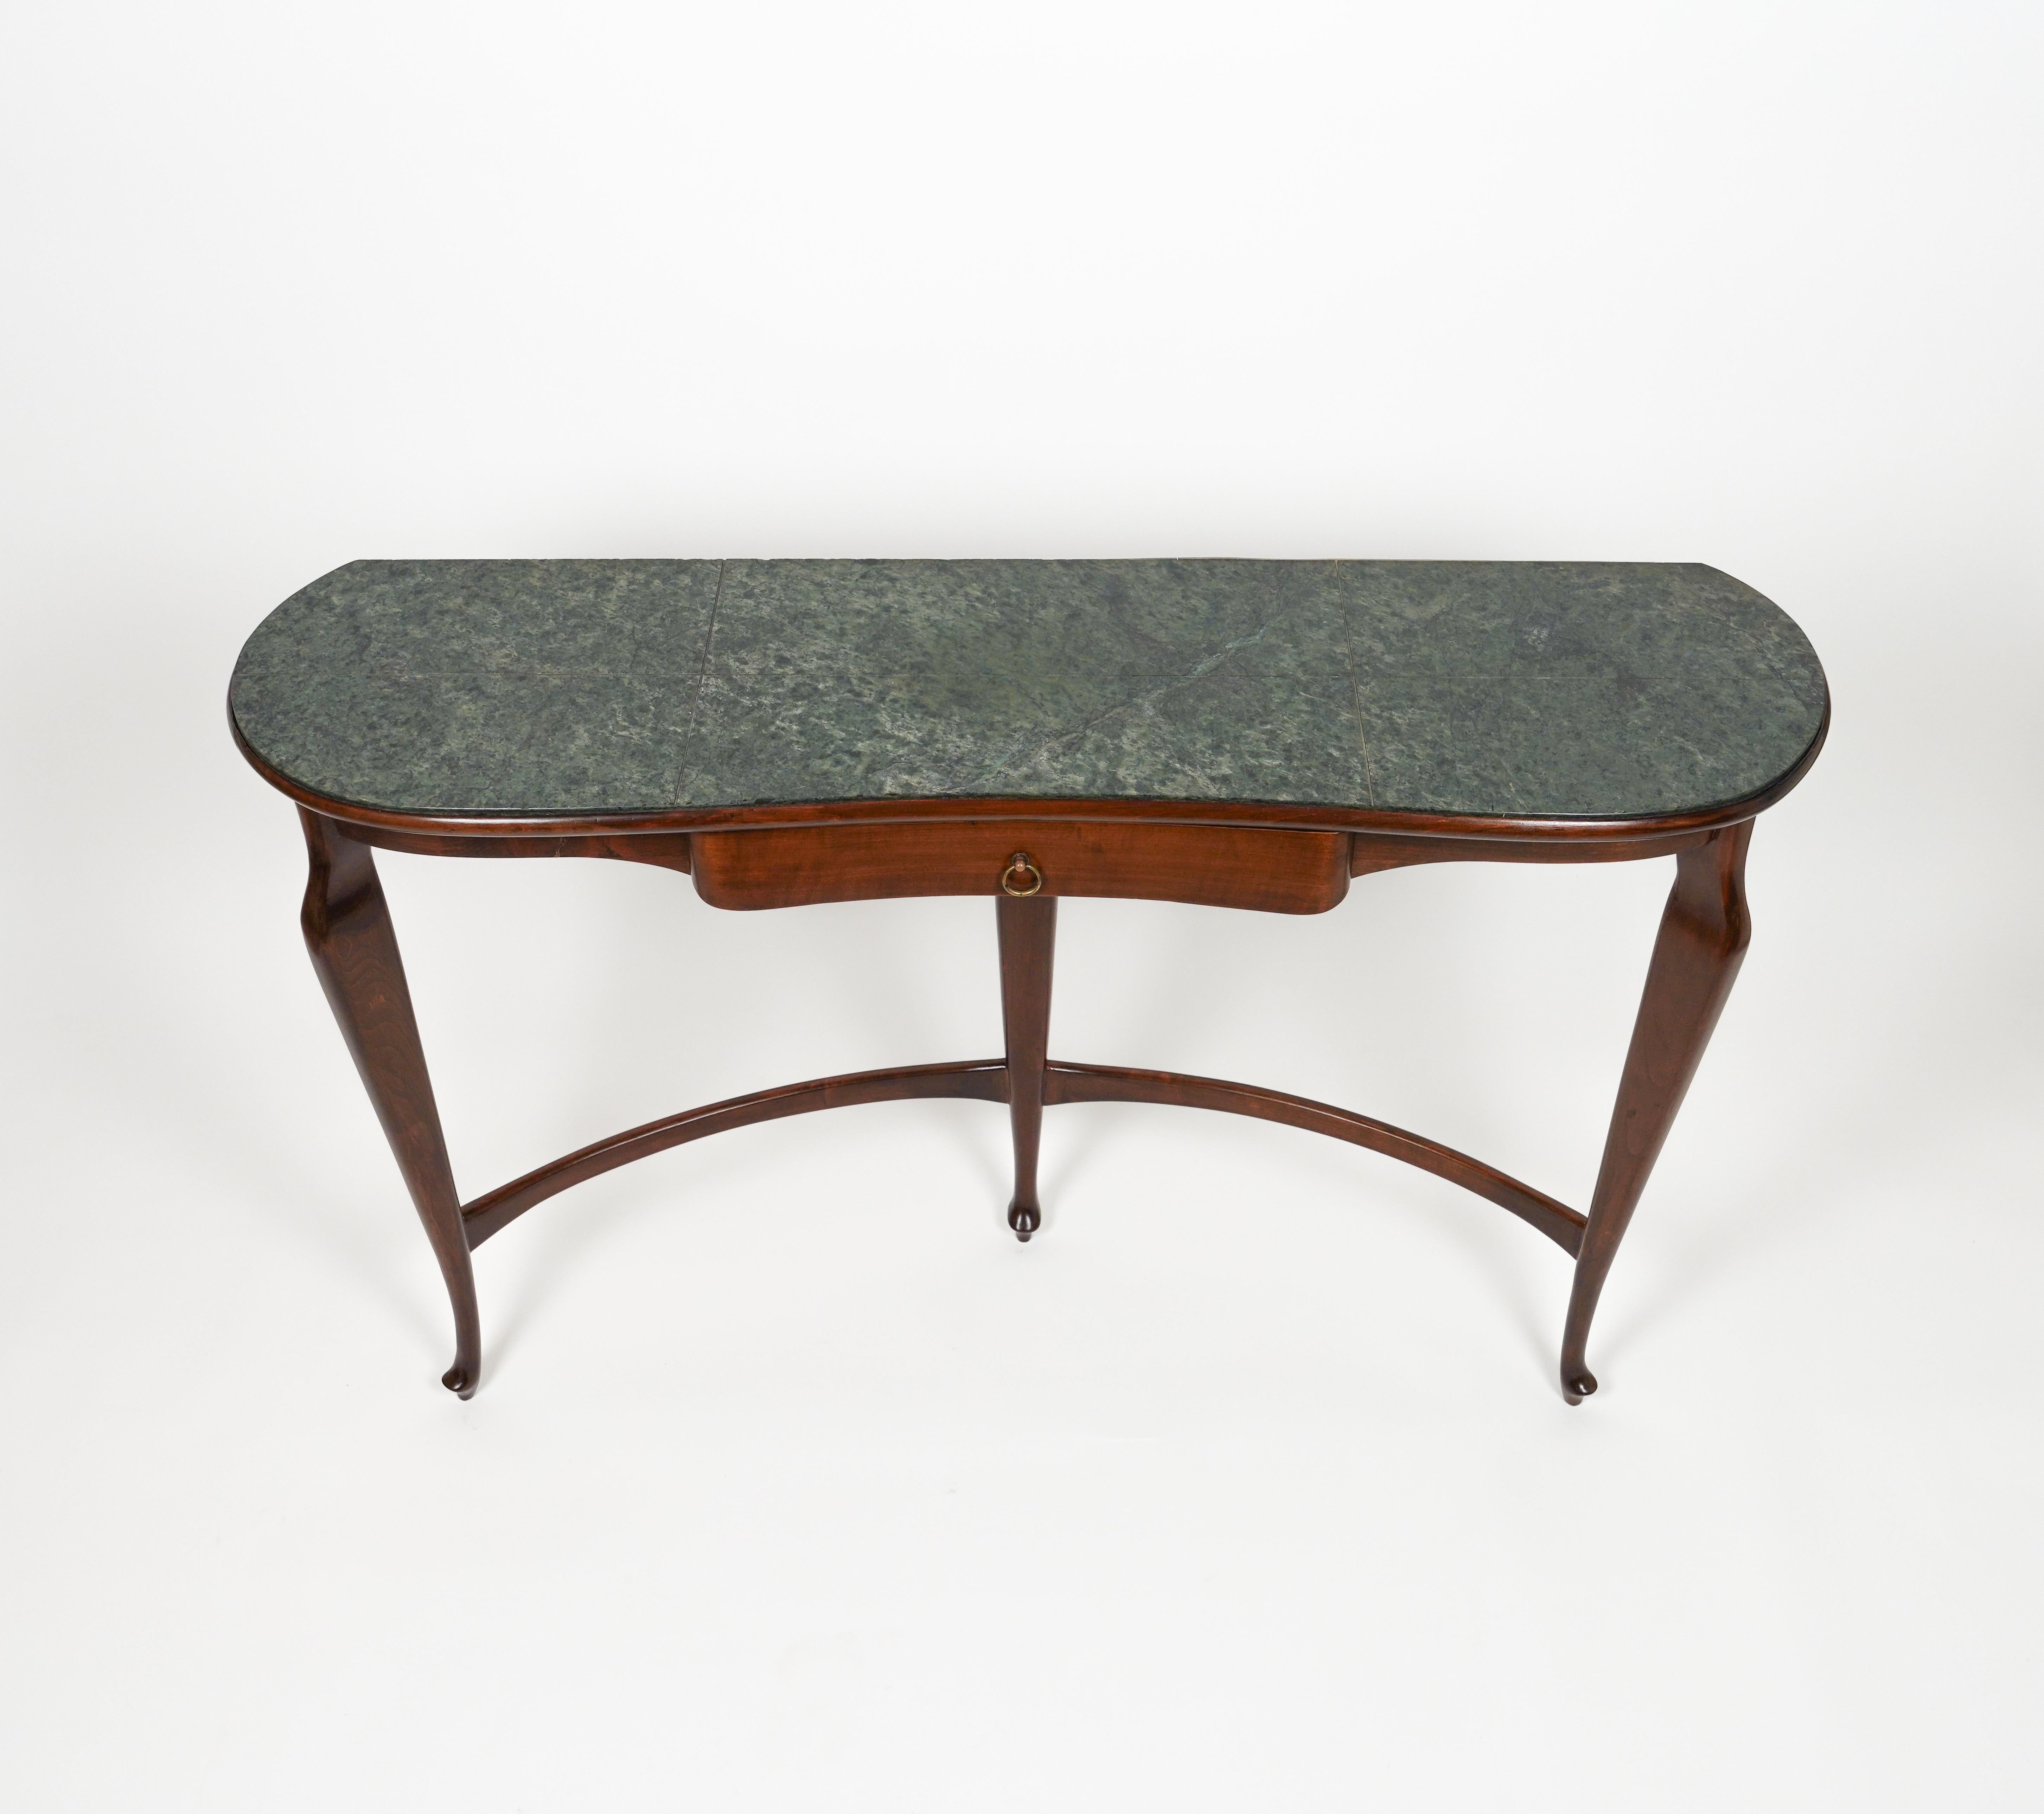 A very elegant and organic wall mount console table, green marble top, wooden frame, tapered legs attributed to Italian design by to Guglielmo Ulrich.

Made in Italy in the 1940s.

Wood has been polished by a professional restorer.